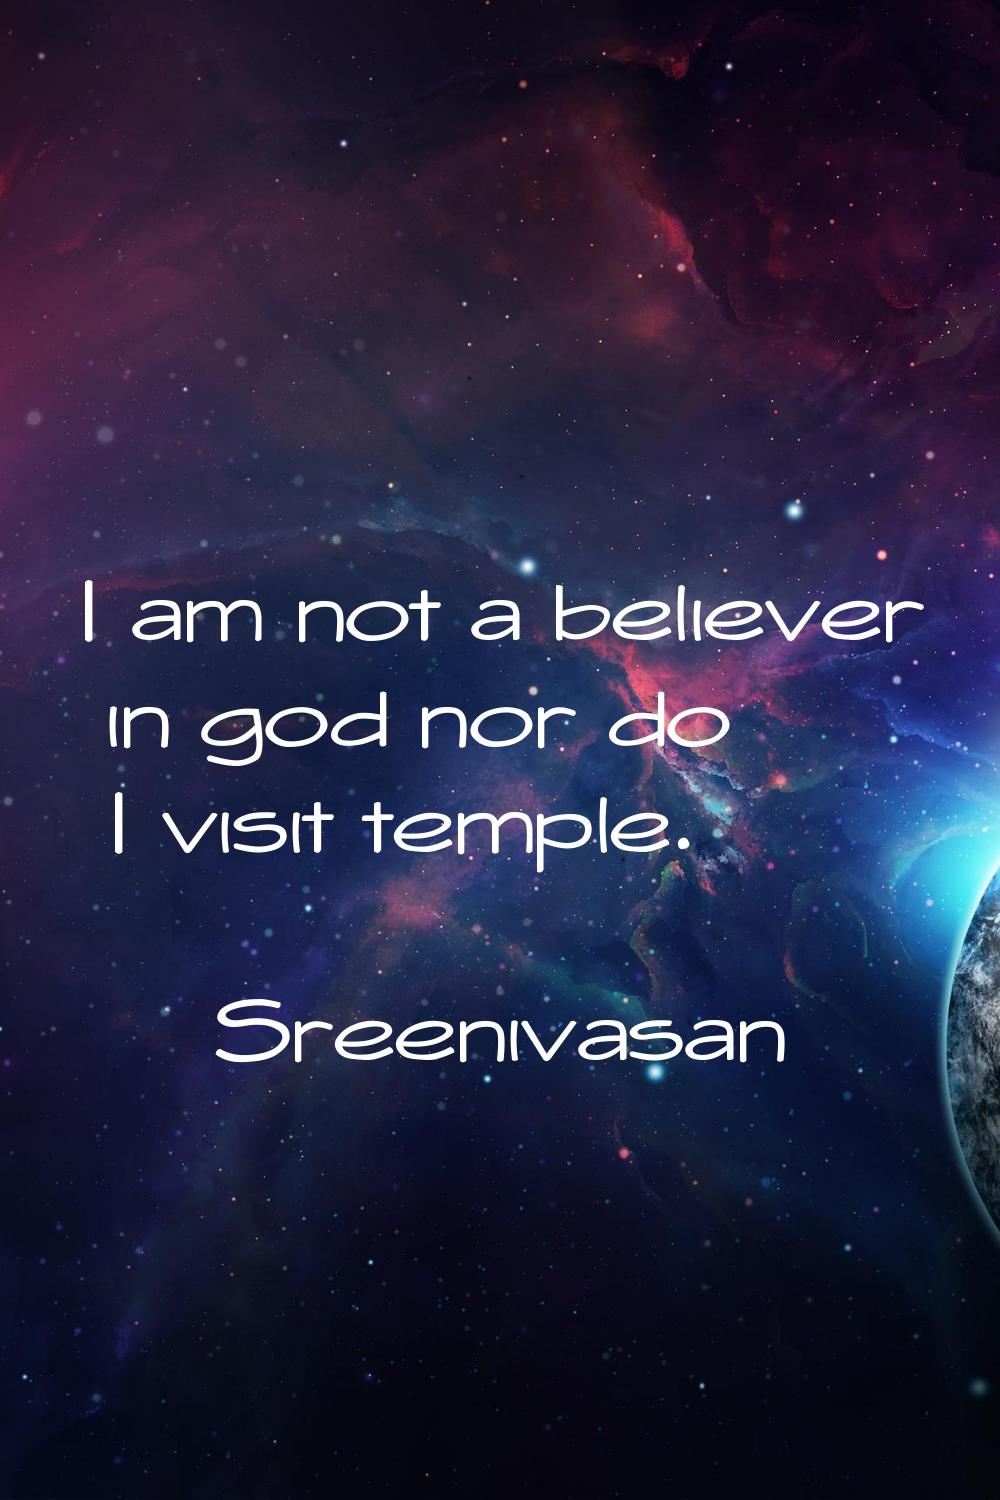 I am not a believer in god nor do I visit temple.